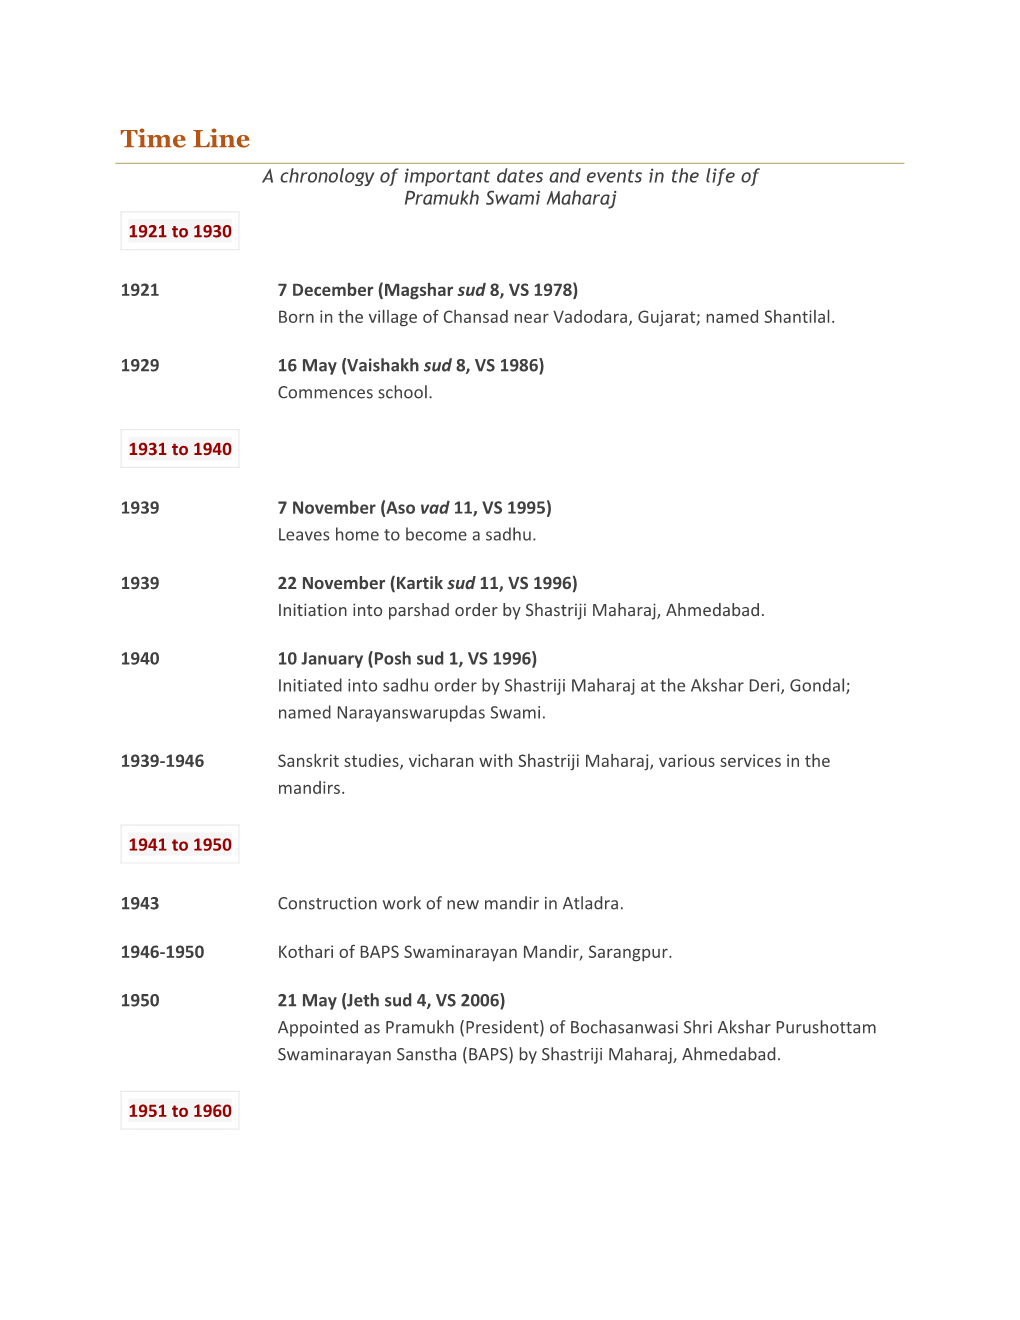 Time Line a Chronology of Important Dates and Events in the Life of Pramukh Swami Maharaj 1921 to 1930